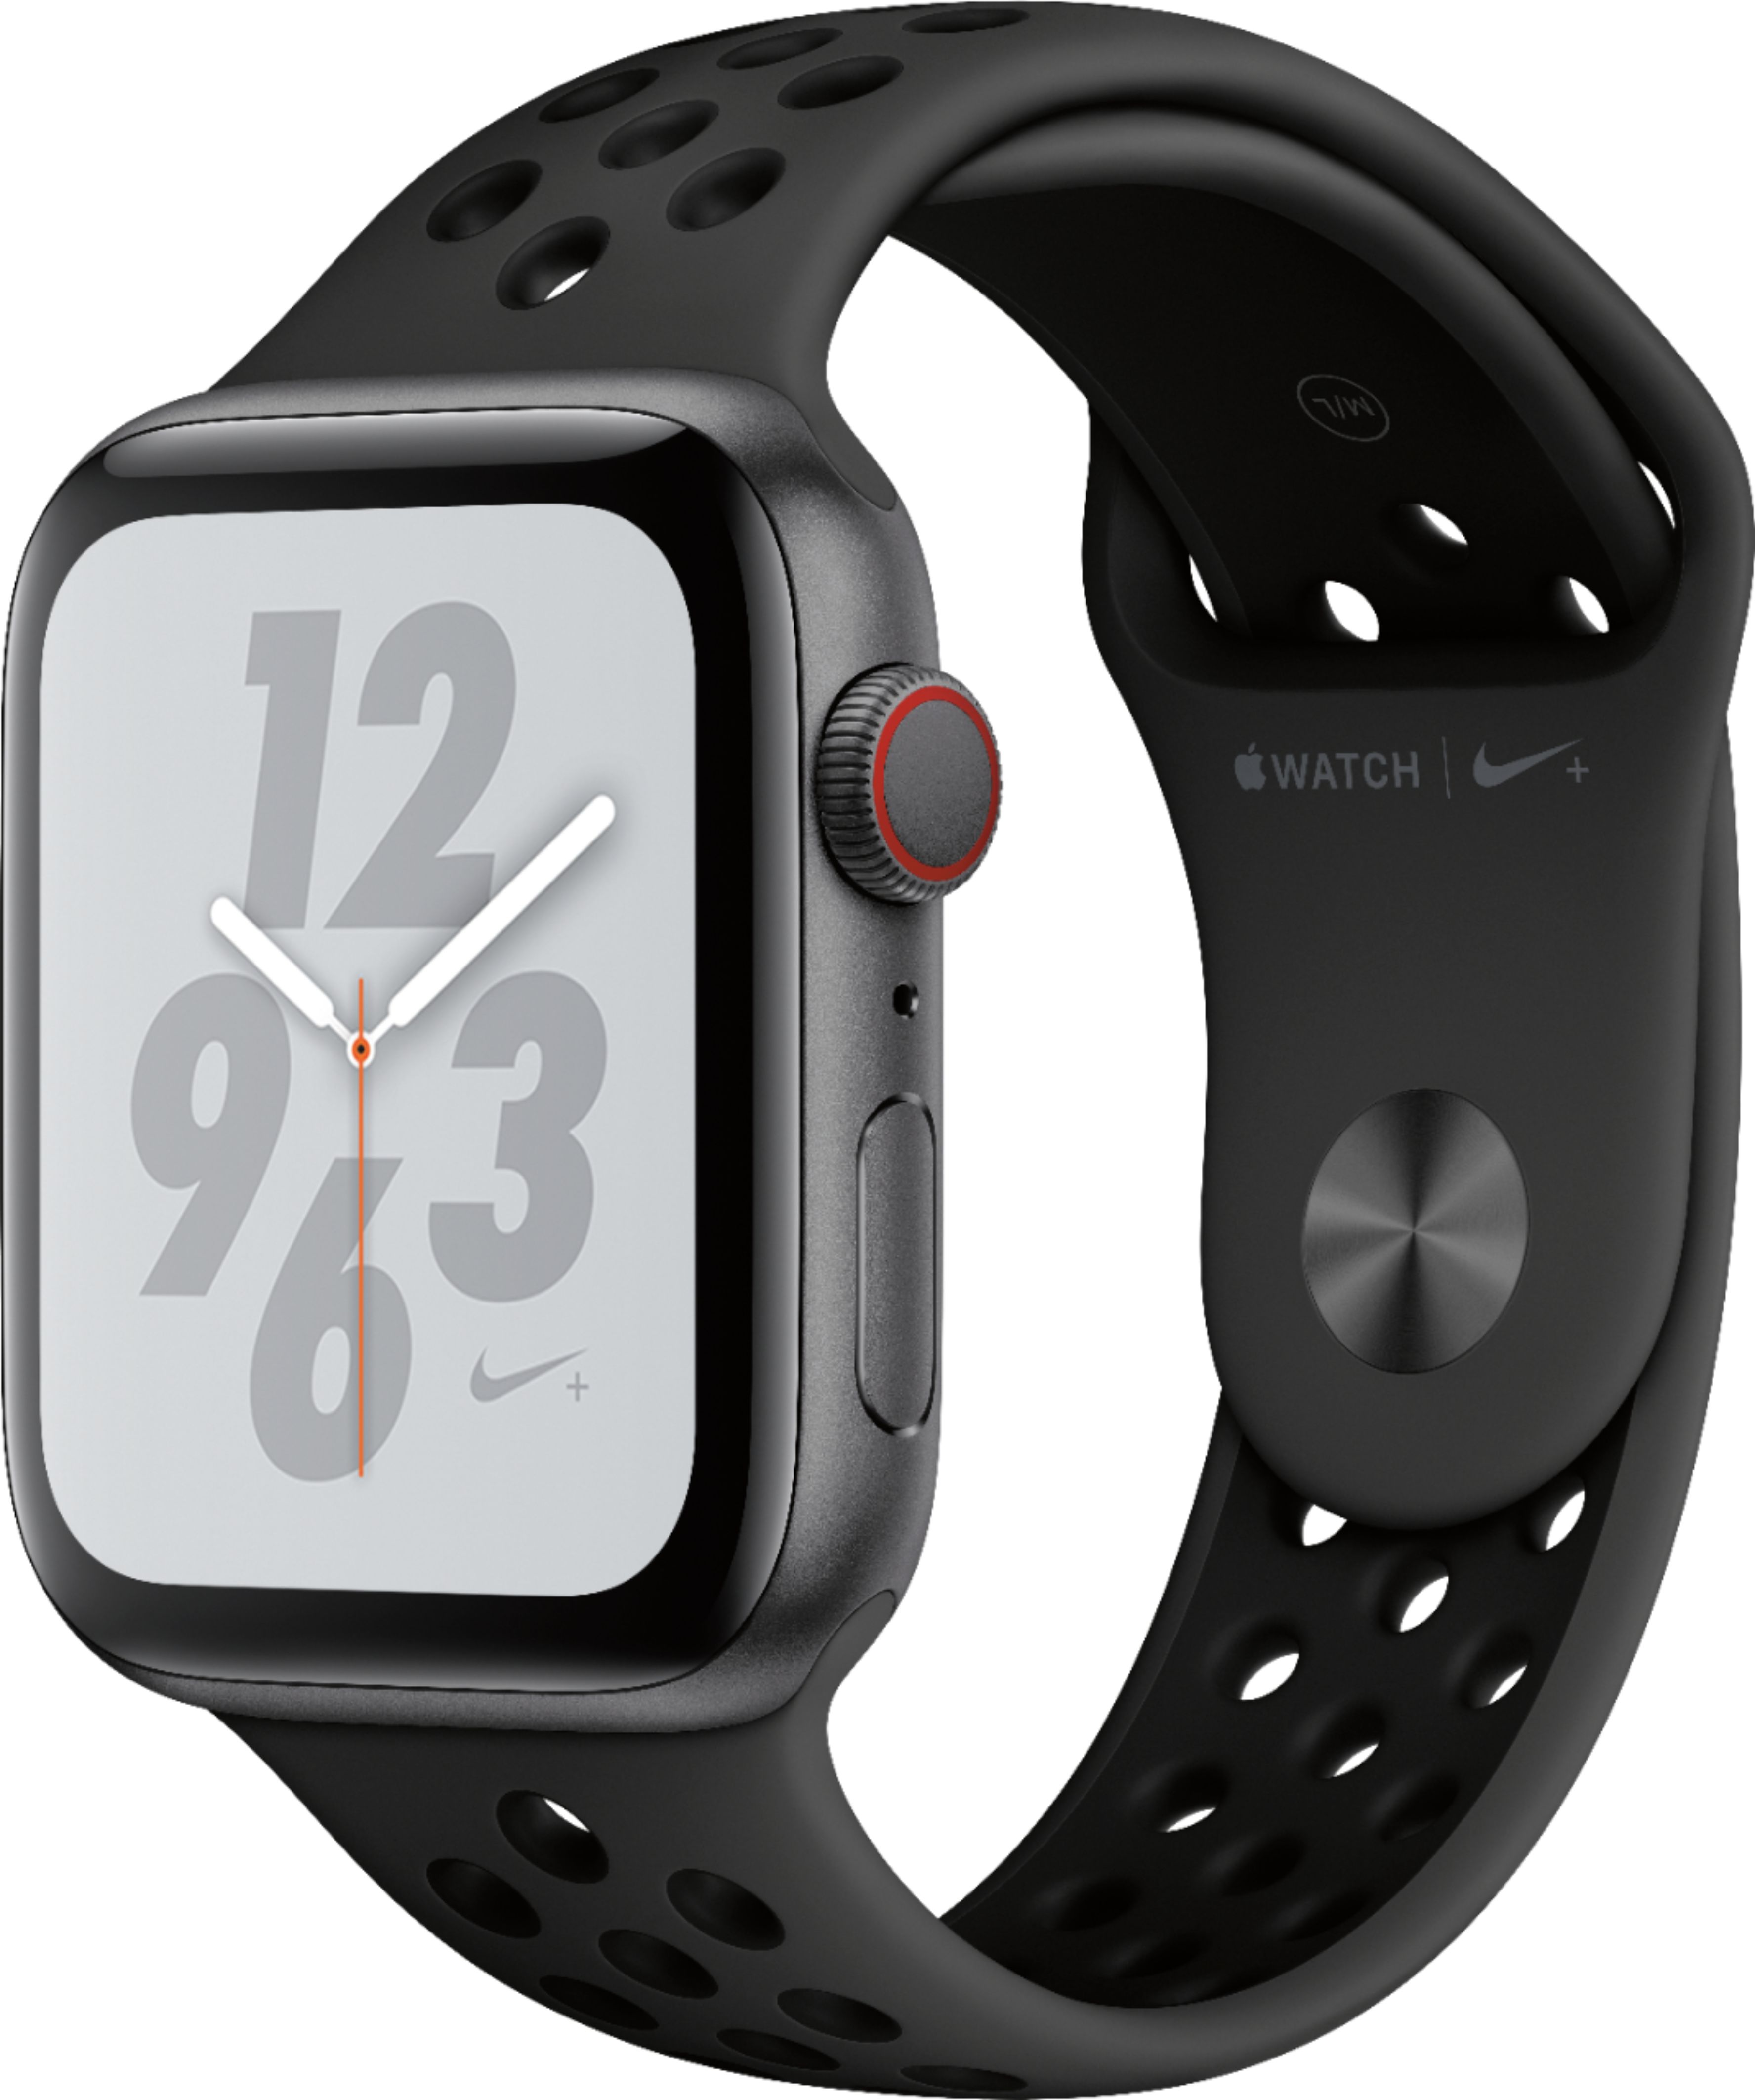 Apple - Apple Watch Nike+ Series 4 (GPS + Cellular) 44mm Space Gray Aluminum Case with Anthracite/Black Nike Sport Band - Space Gray Aluminum